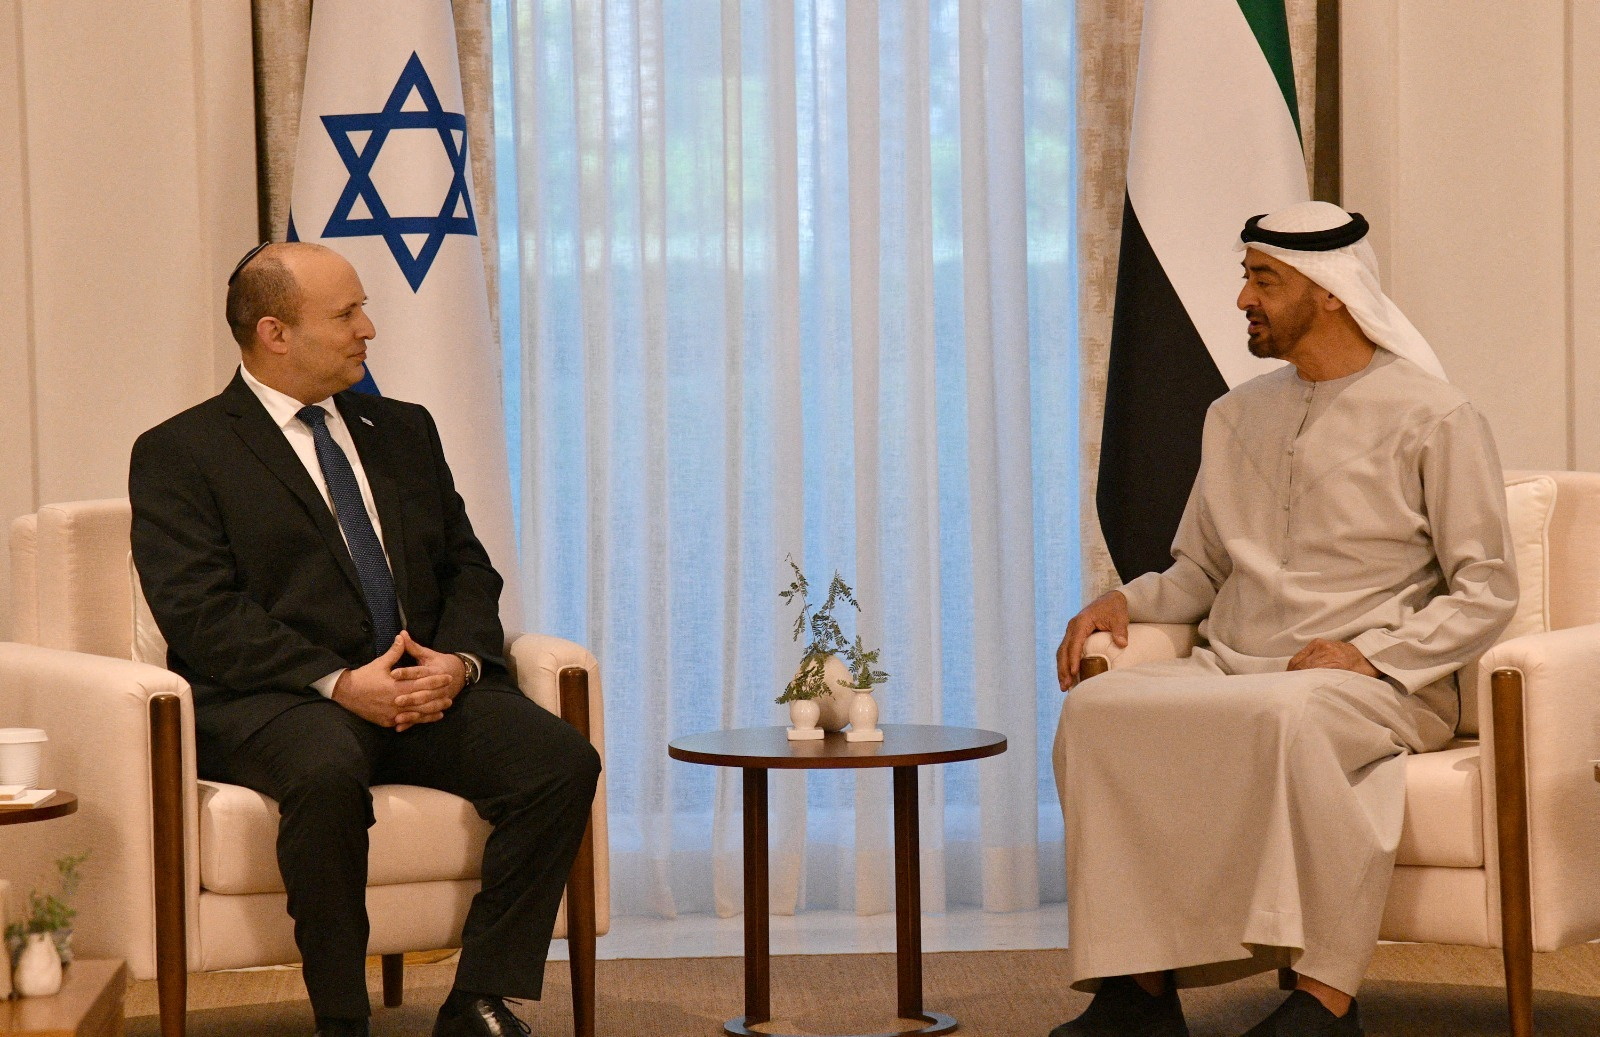 Israeli Prime Minister Naftali Bennett meets with Abu Dhabi Crown Prince Sheikh Mohammed bin Zayed at his private palace in Abu Dhabi